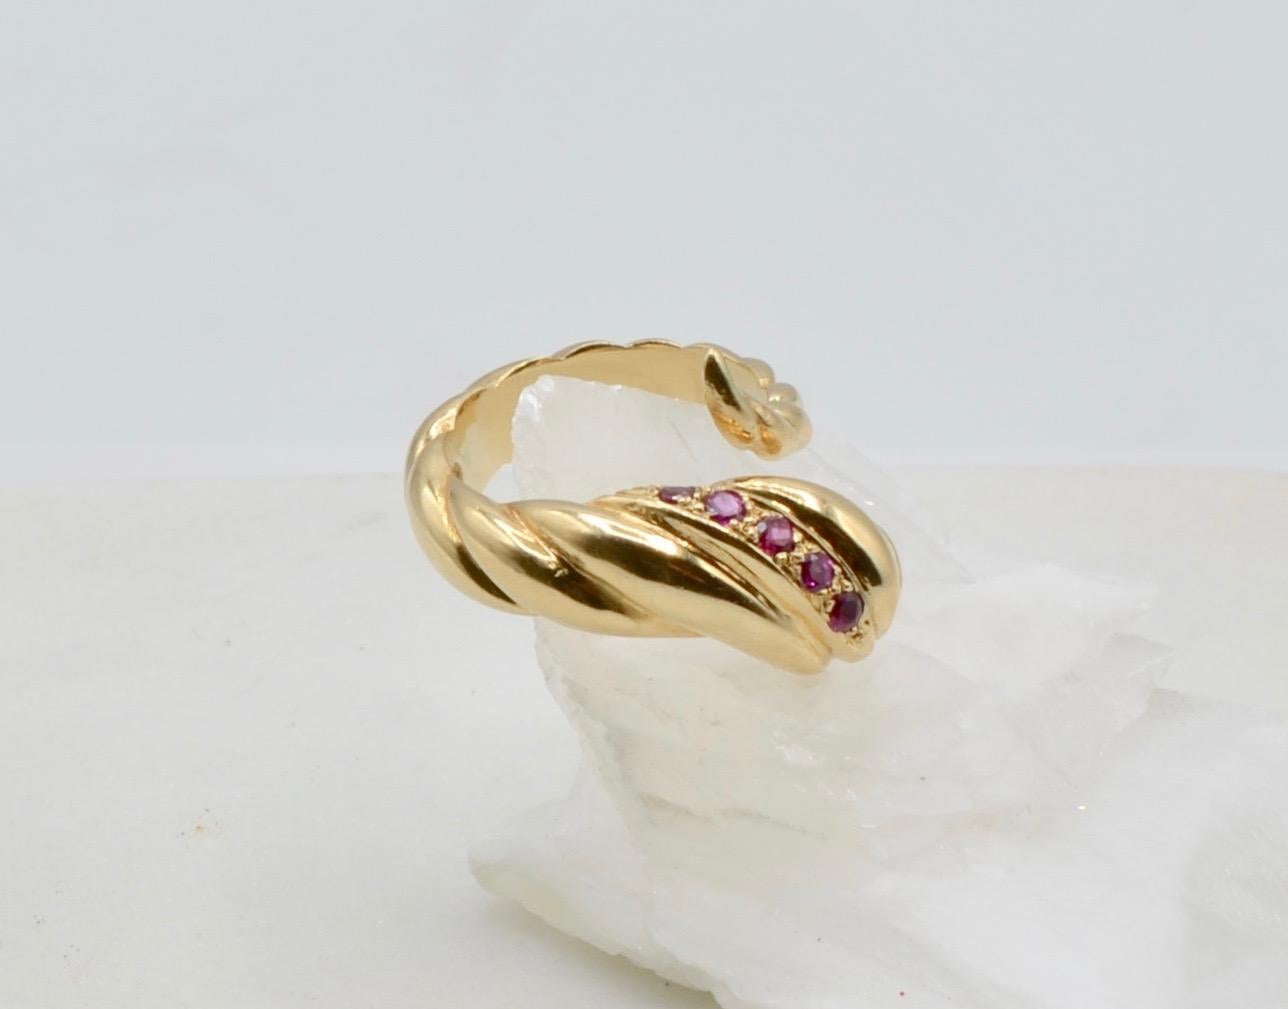 This modern version of the snake ring has a twisted groove design with 5 round rubies  (aprox. 0.24 TCW) set to mimic a head with red eyes. The ring has a nice weight to it and would look stunning alone or with other rings. It is a size 6 3/4 and